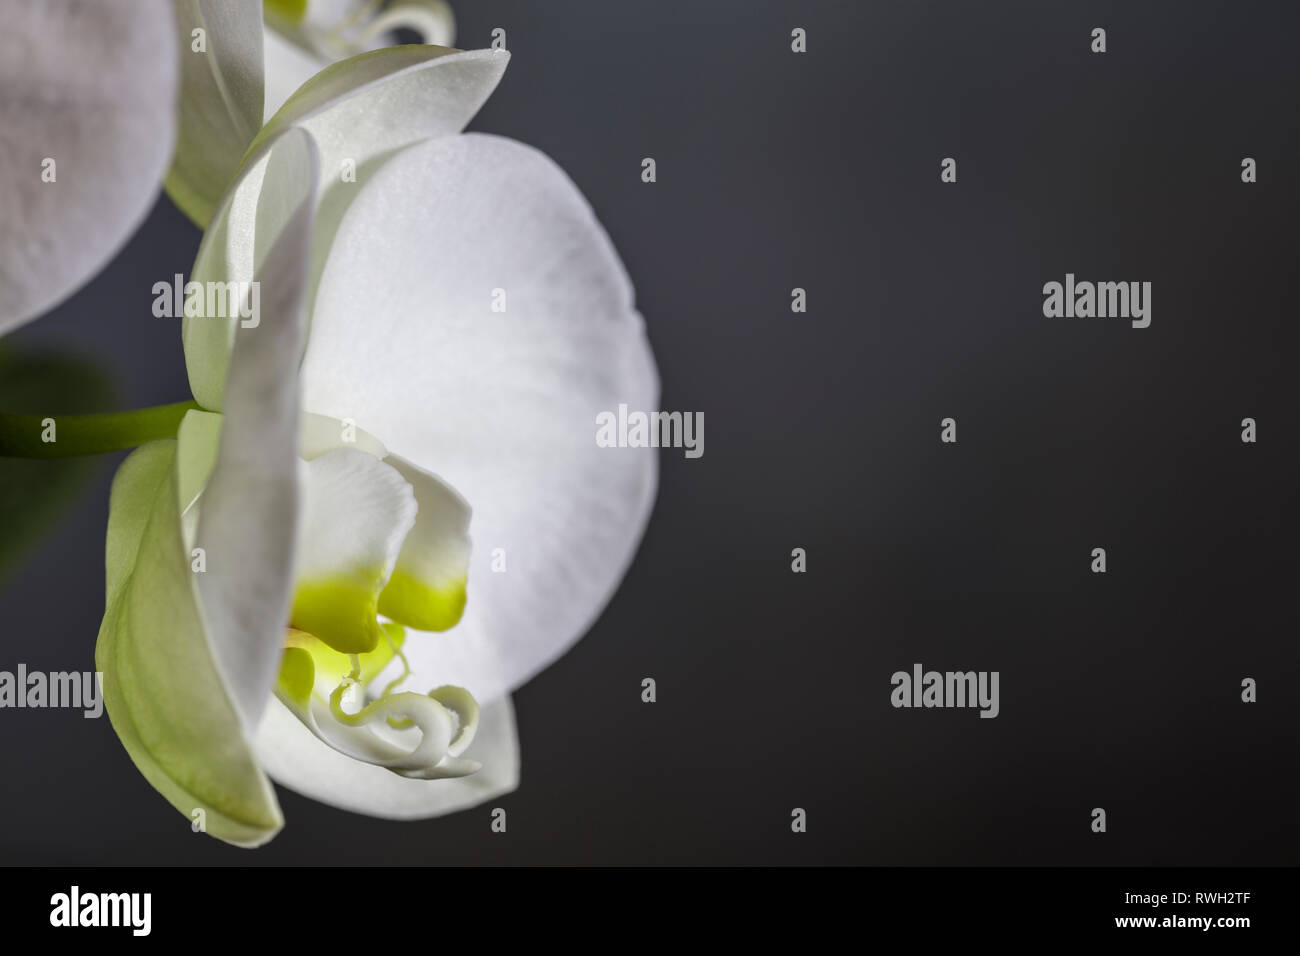 White orchid.  Close up study of a single flower against a plain dark background with space for copy Stock Photo